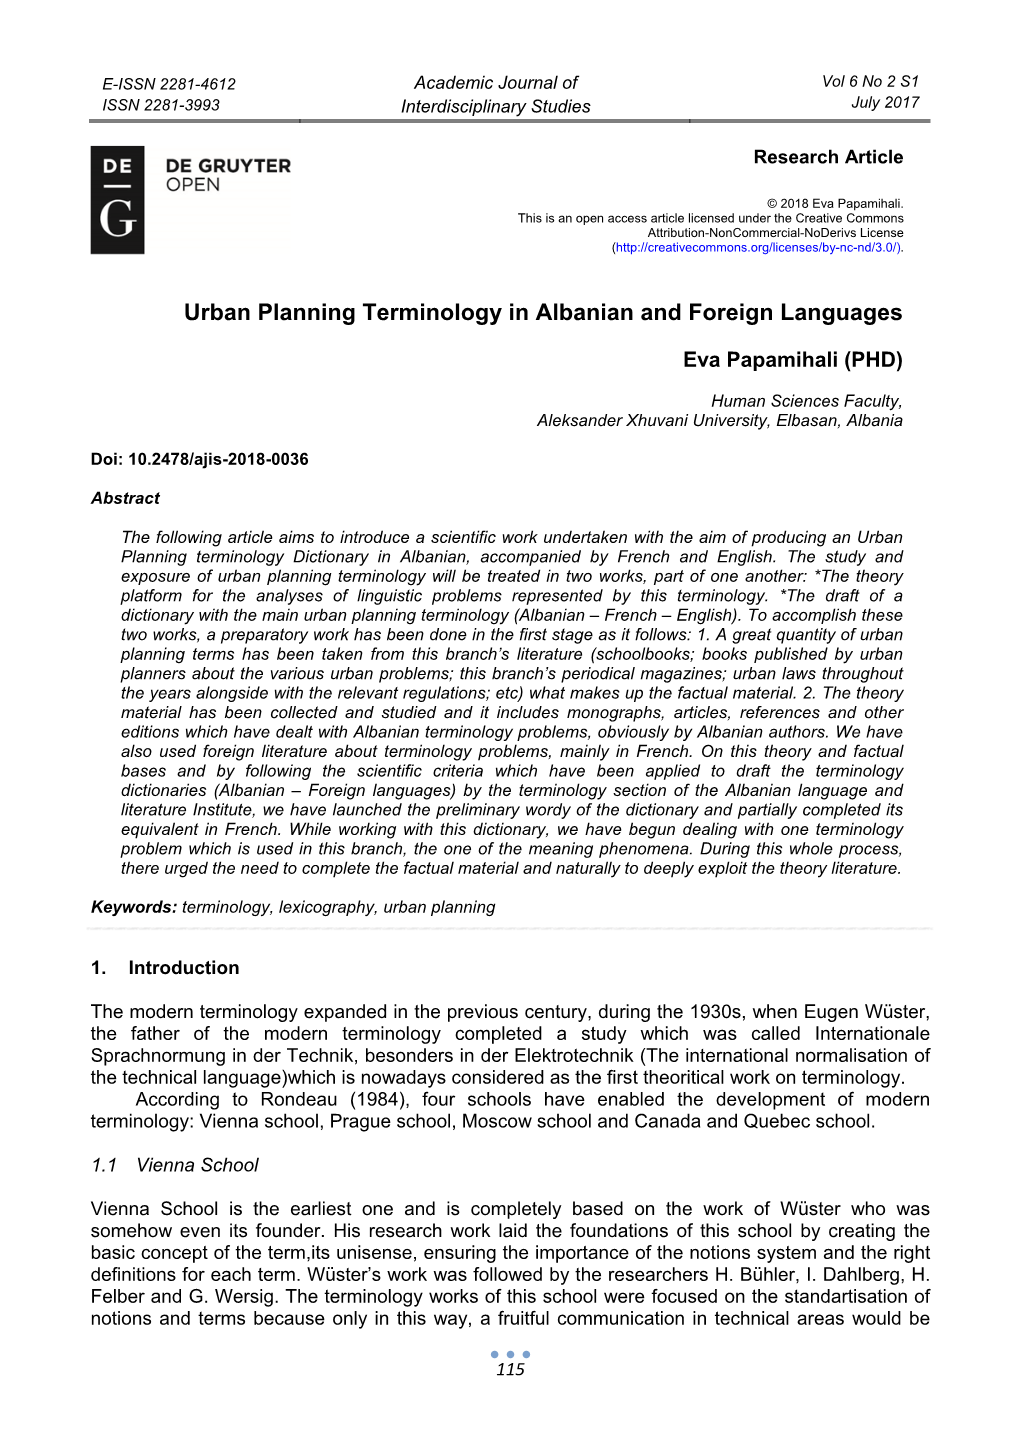 Urban Planning Terminology in Albanian and Foreign Languages